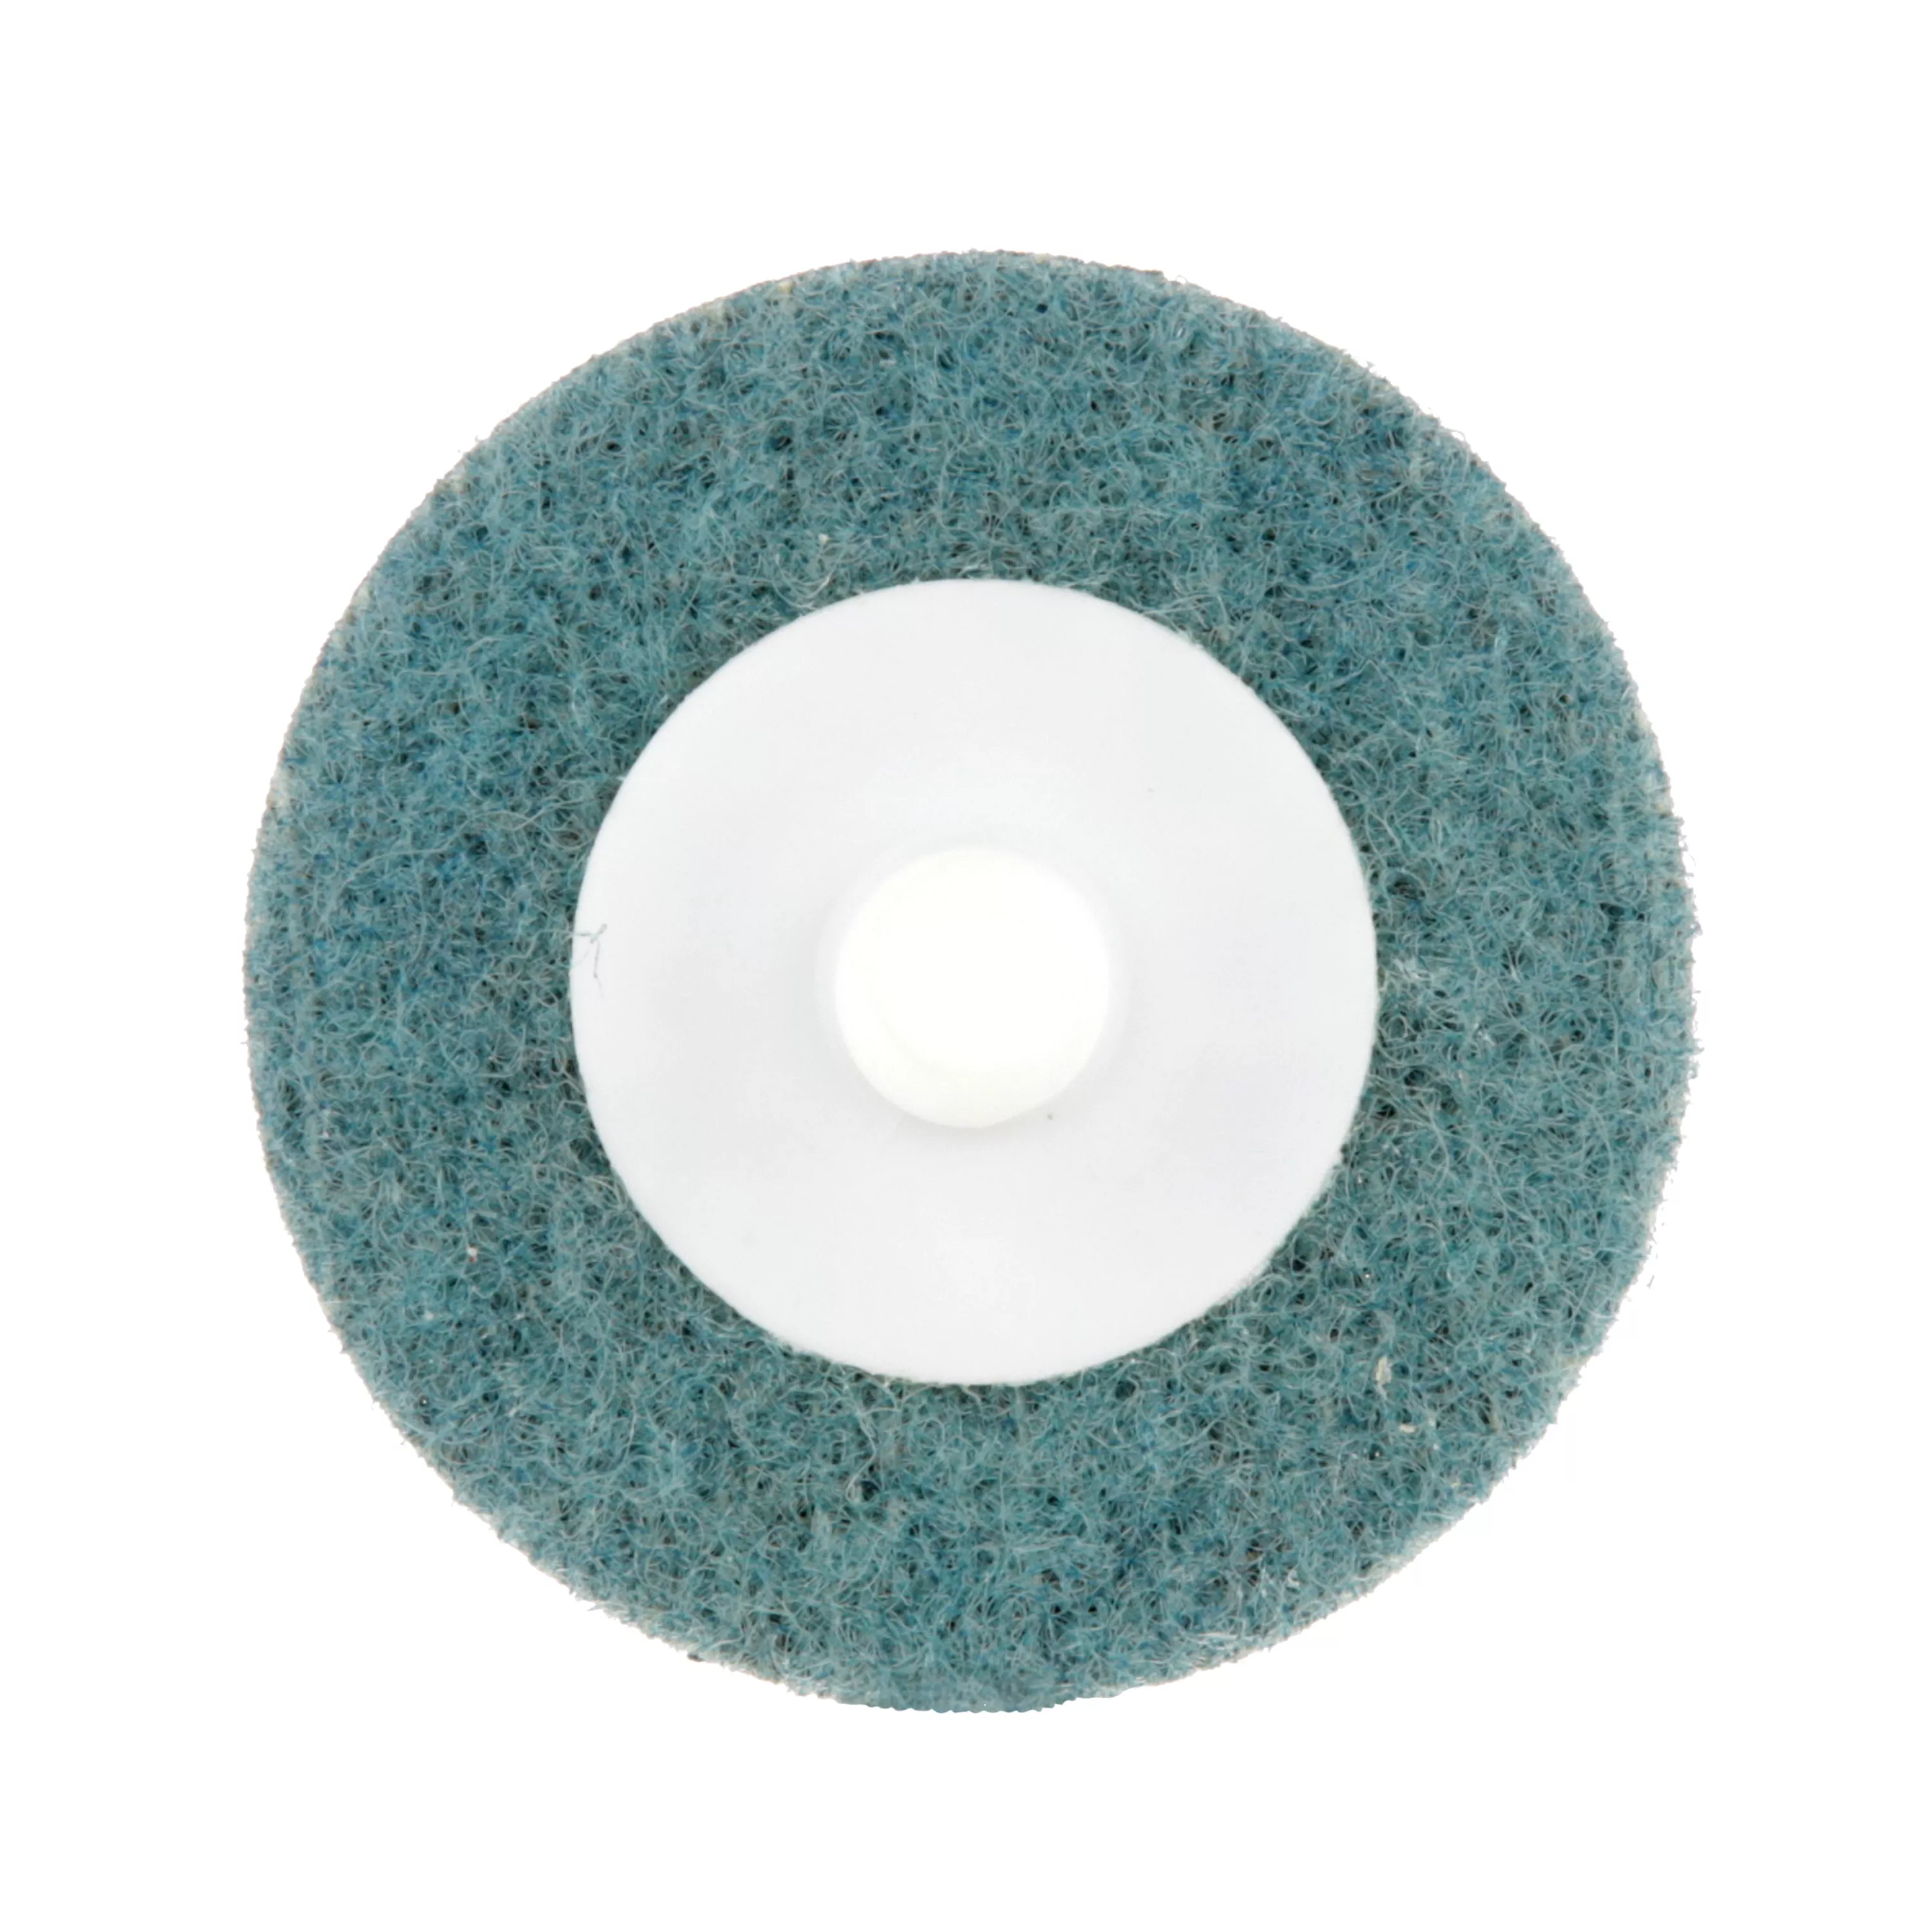 SKU 7000046867 | Standard Abrasives™ Quick Change Surface Conditioning RC Disc